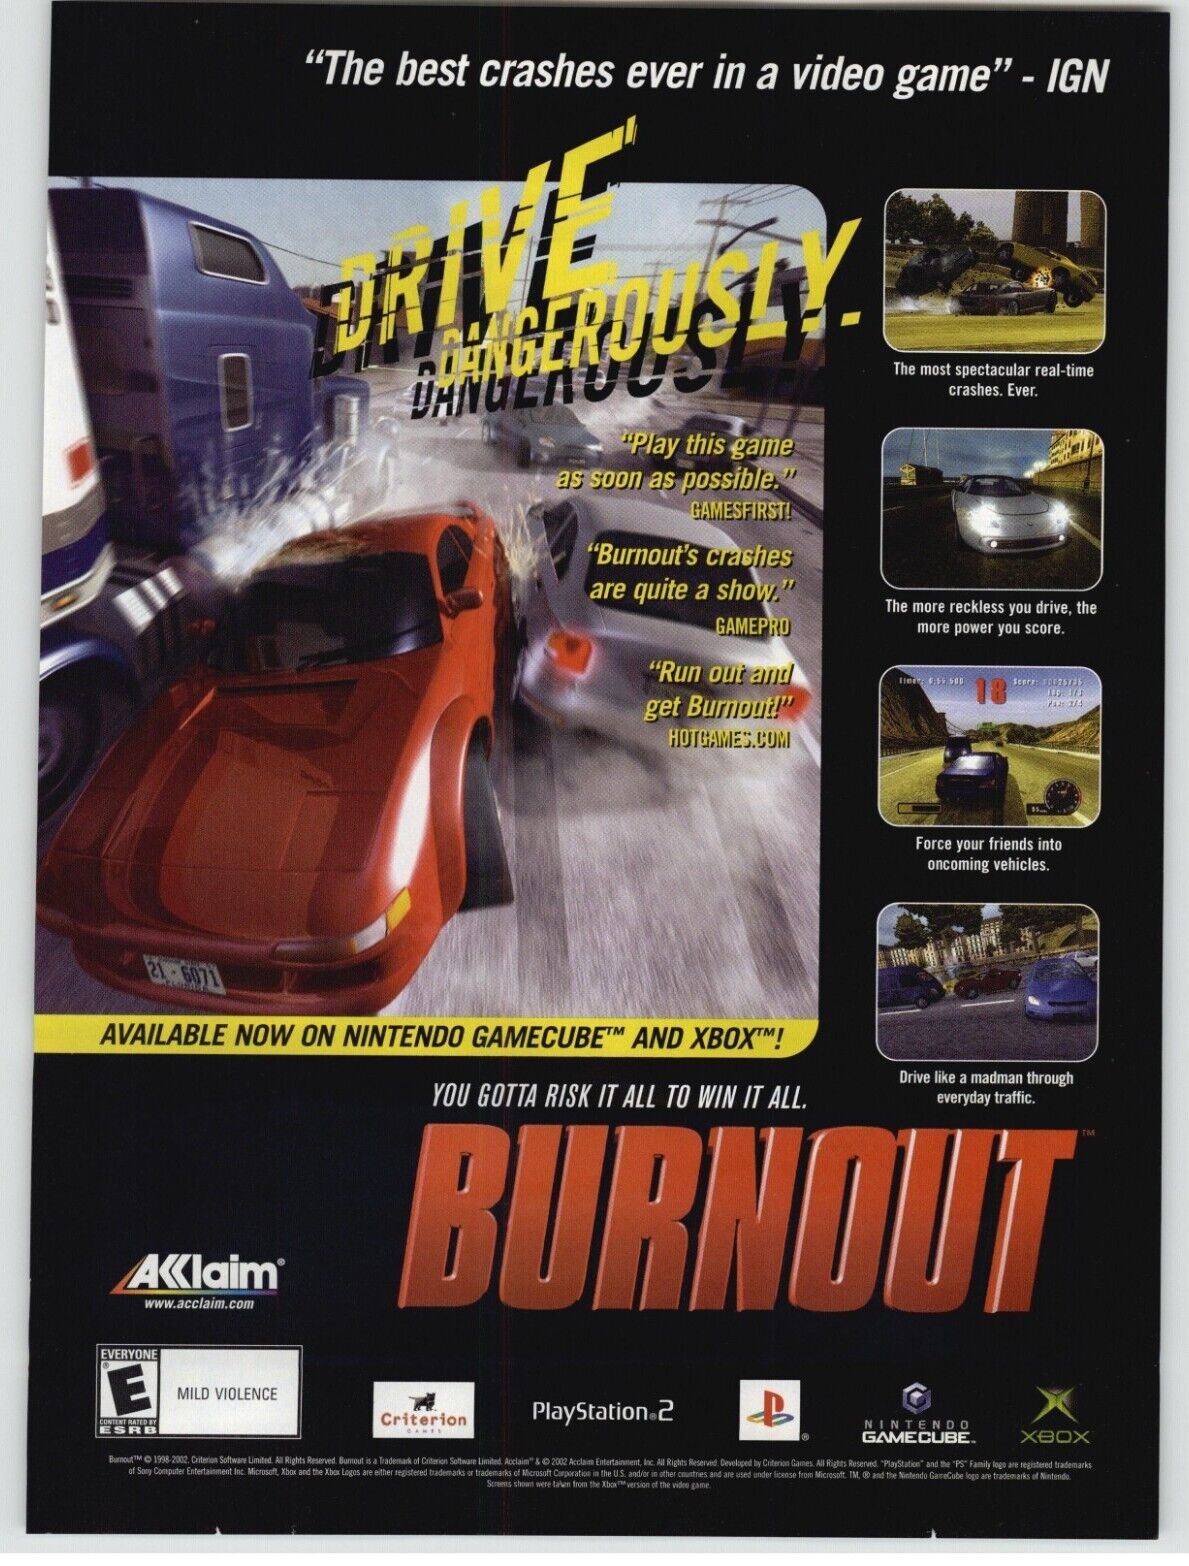 Burnout PS2 Xbox Gamecube 2001 Print Ad/Poster Official Racing Video Game Art